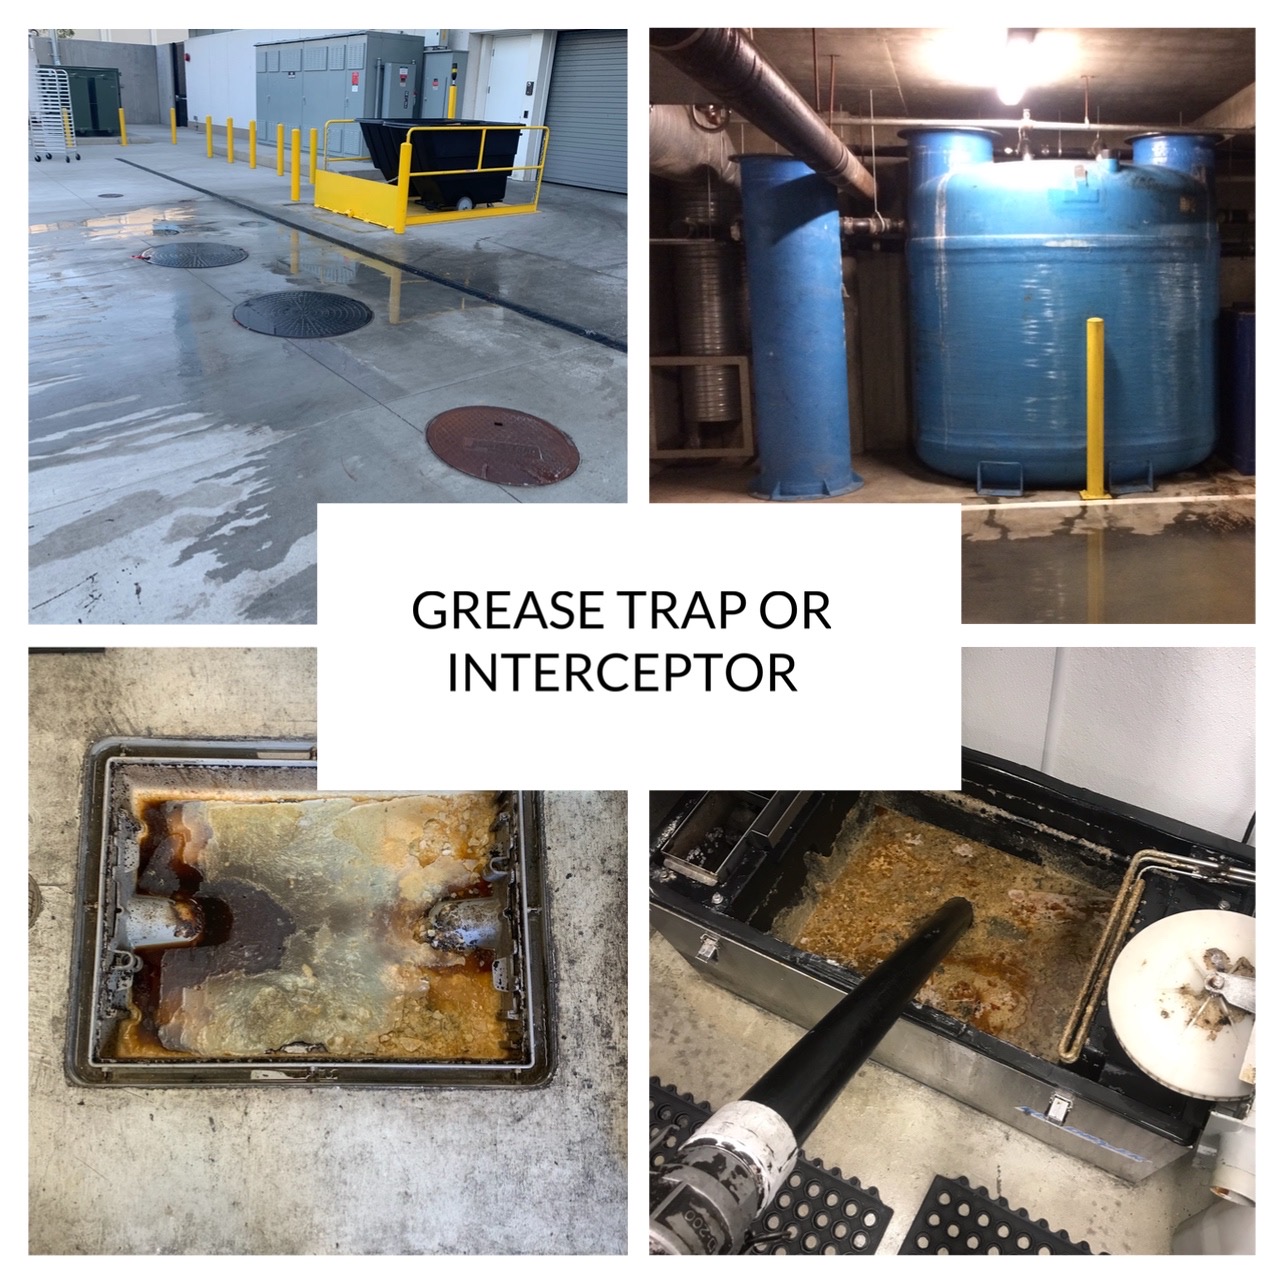 What Is The Difference Between A Grease Trap or A Grease Interceptor? The Main Difference Between Both Devices Is The Size. 